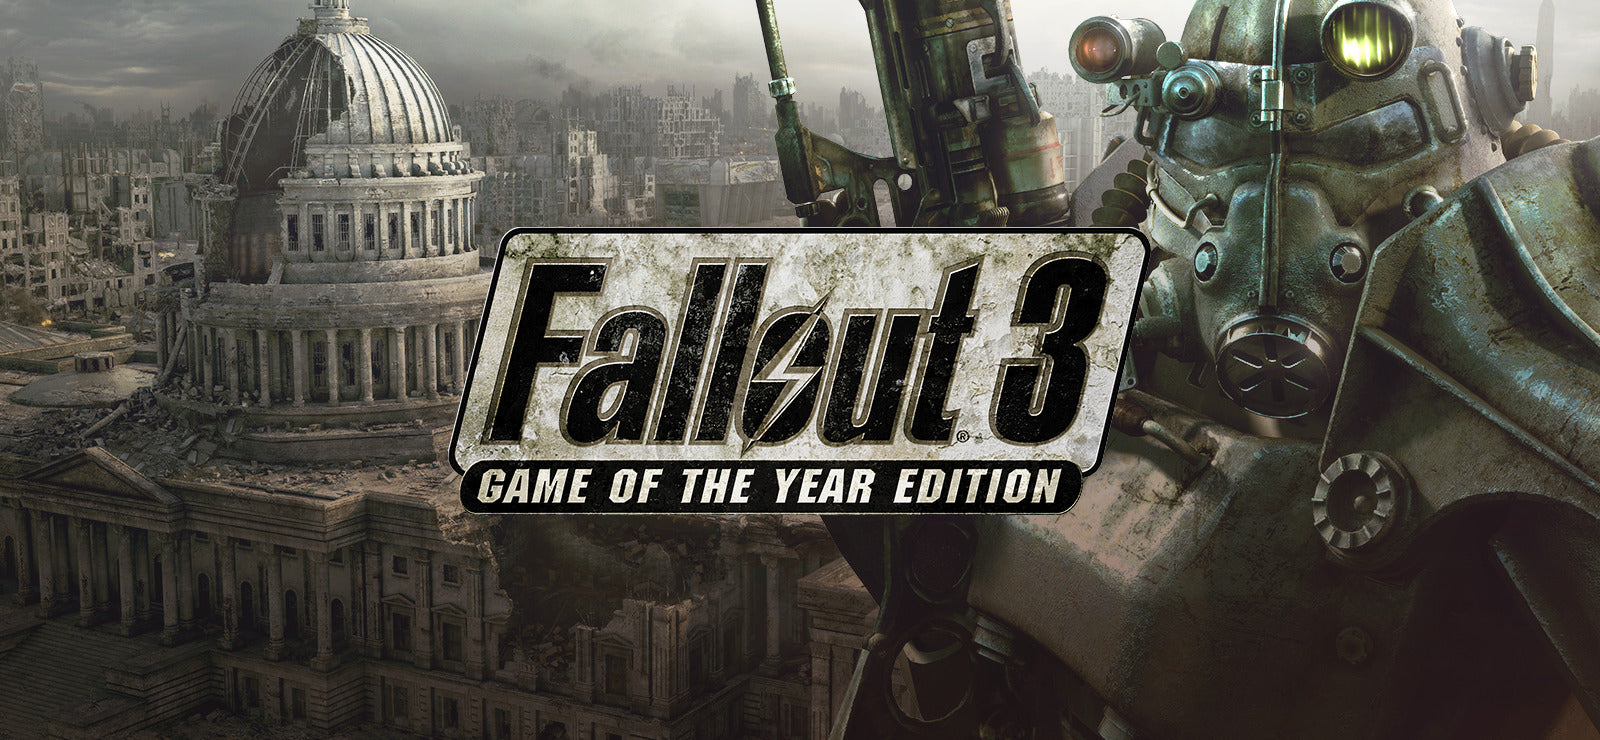 Fallout 3: Game of the Year Edition (Greatest Hits) - PlayStation 3 (PS3) Game